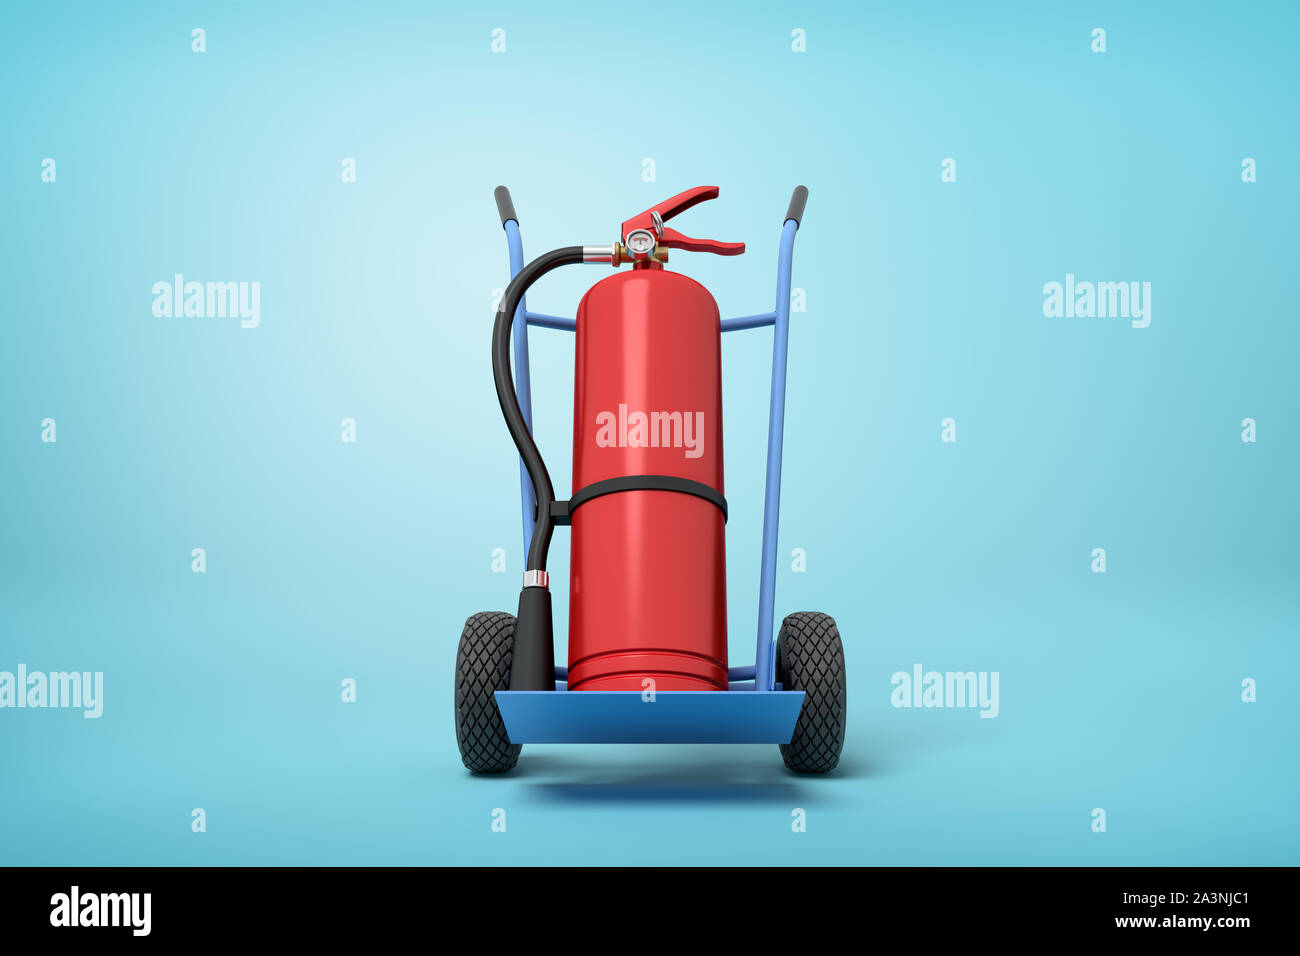 3d rendering of big red fire extinguisher on blue hand truck that is standing in half-turn on light-blue background with copy space. Stock Photo